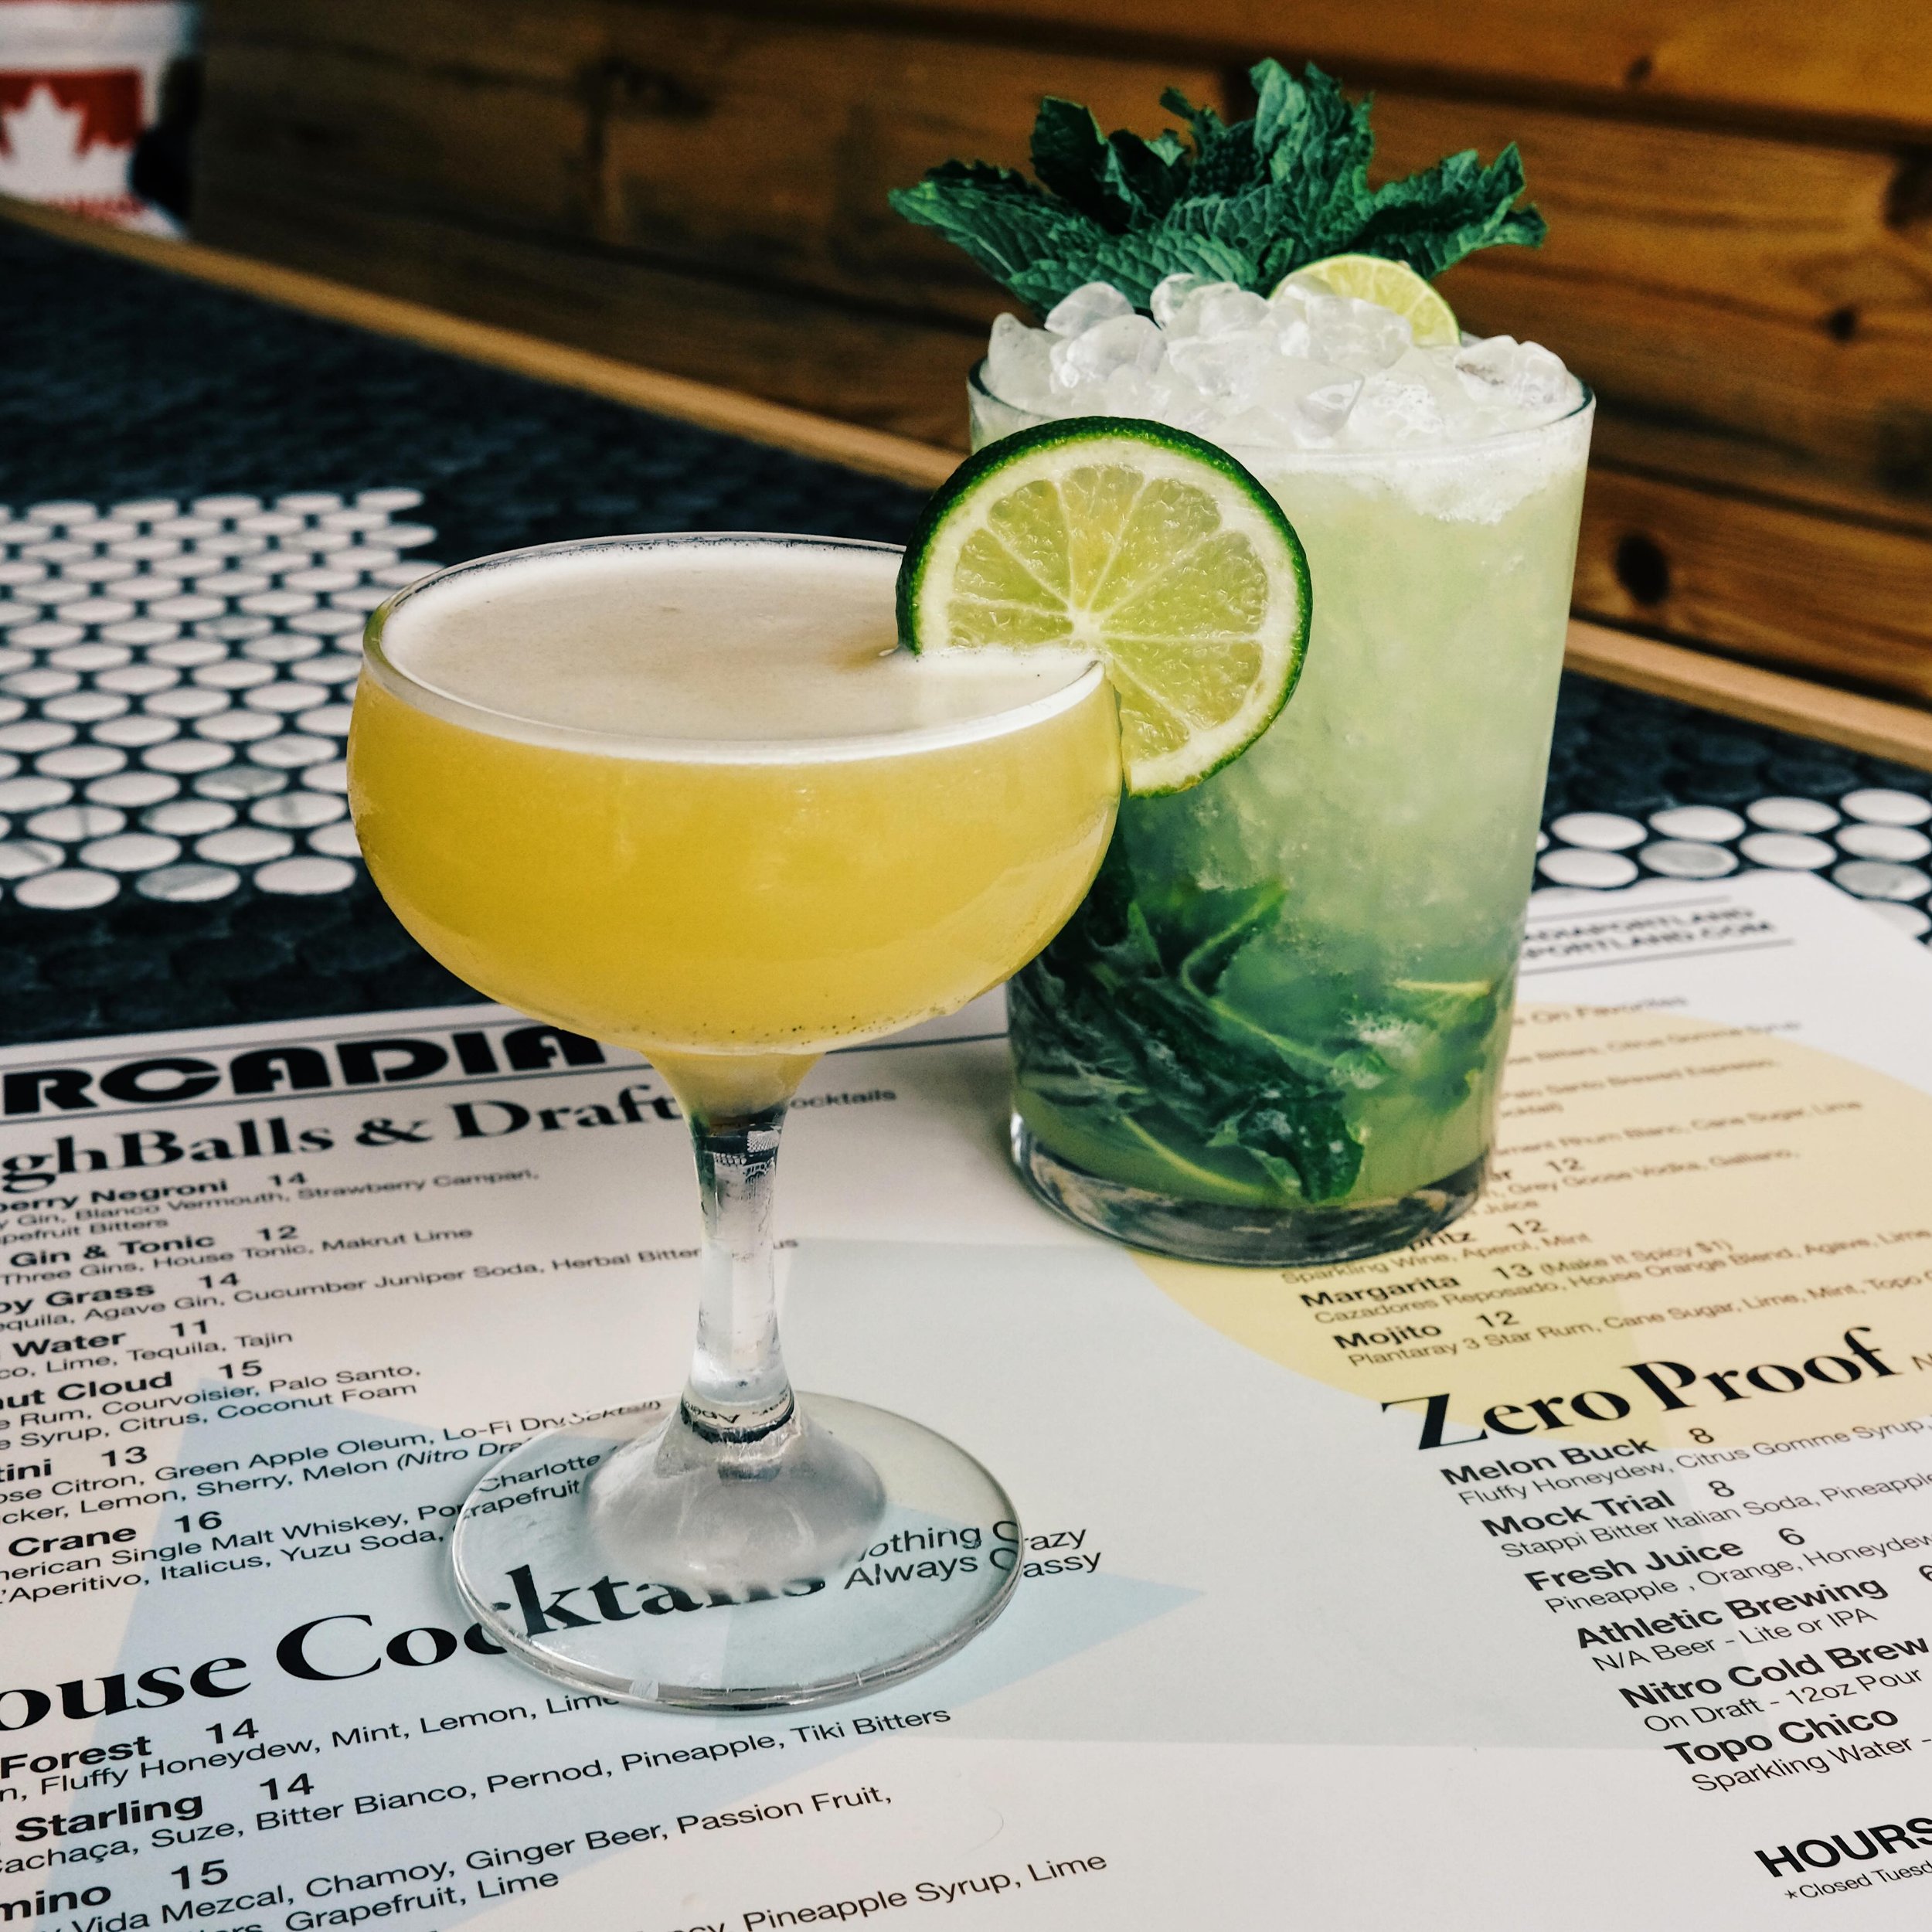 *New Menu Watch* The National Cocktail Service has issued a New Menu Watch currently in effect at Arcadia. Residents are strongly encouraged to sip through this weekend. Currently at a Category 3, these drinks are expected to get stronger as 5pm appr